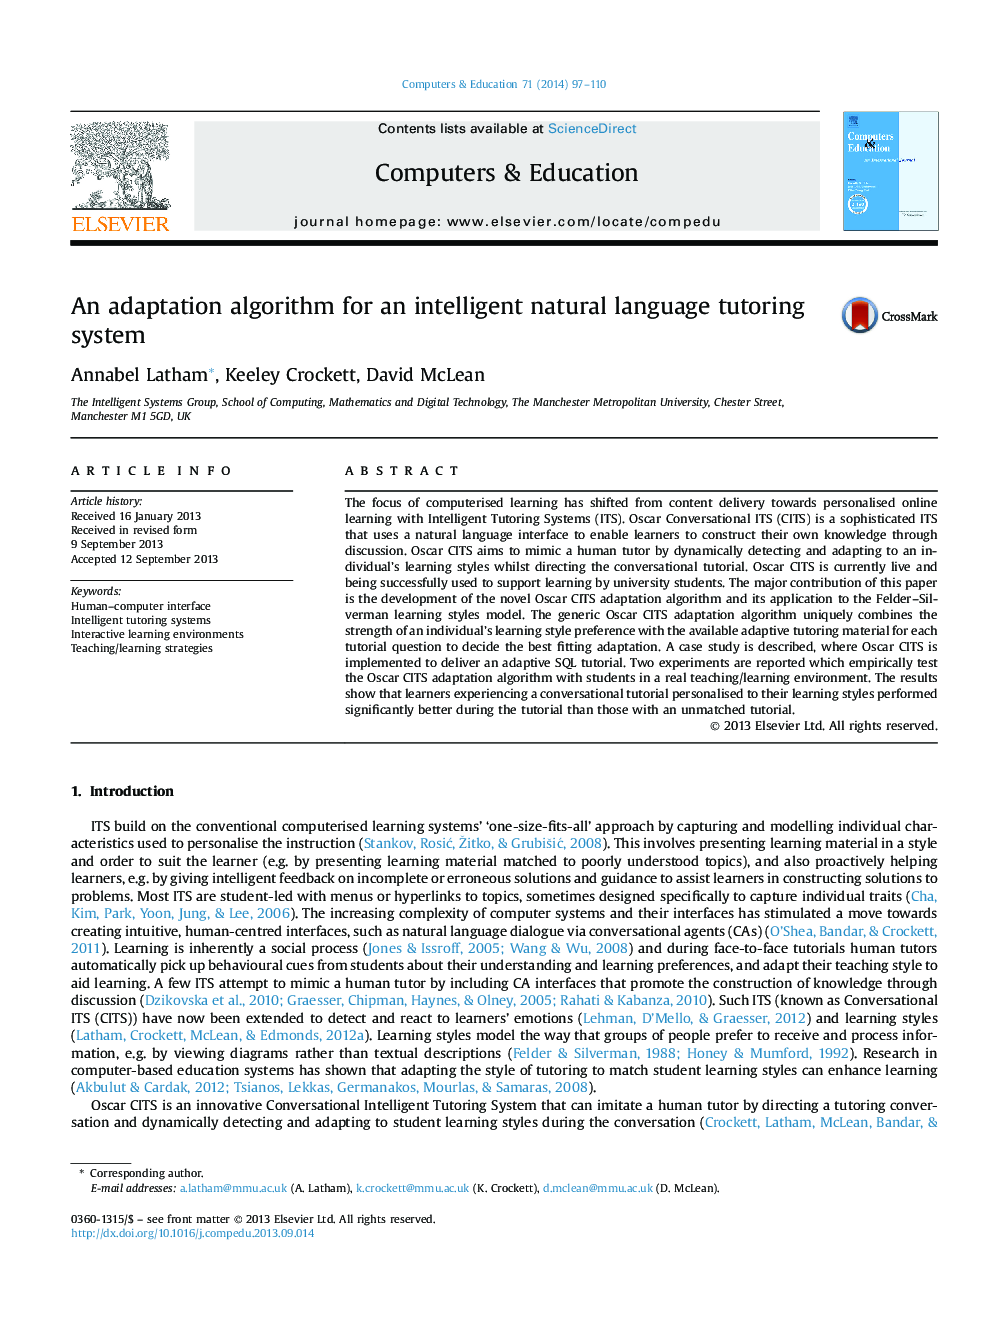 An adaptation algorithm for an intelligent natural language tutoring system